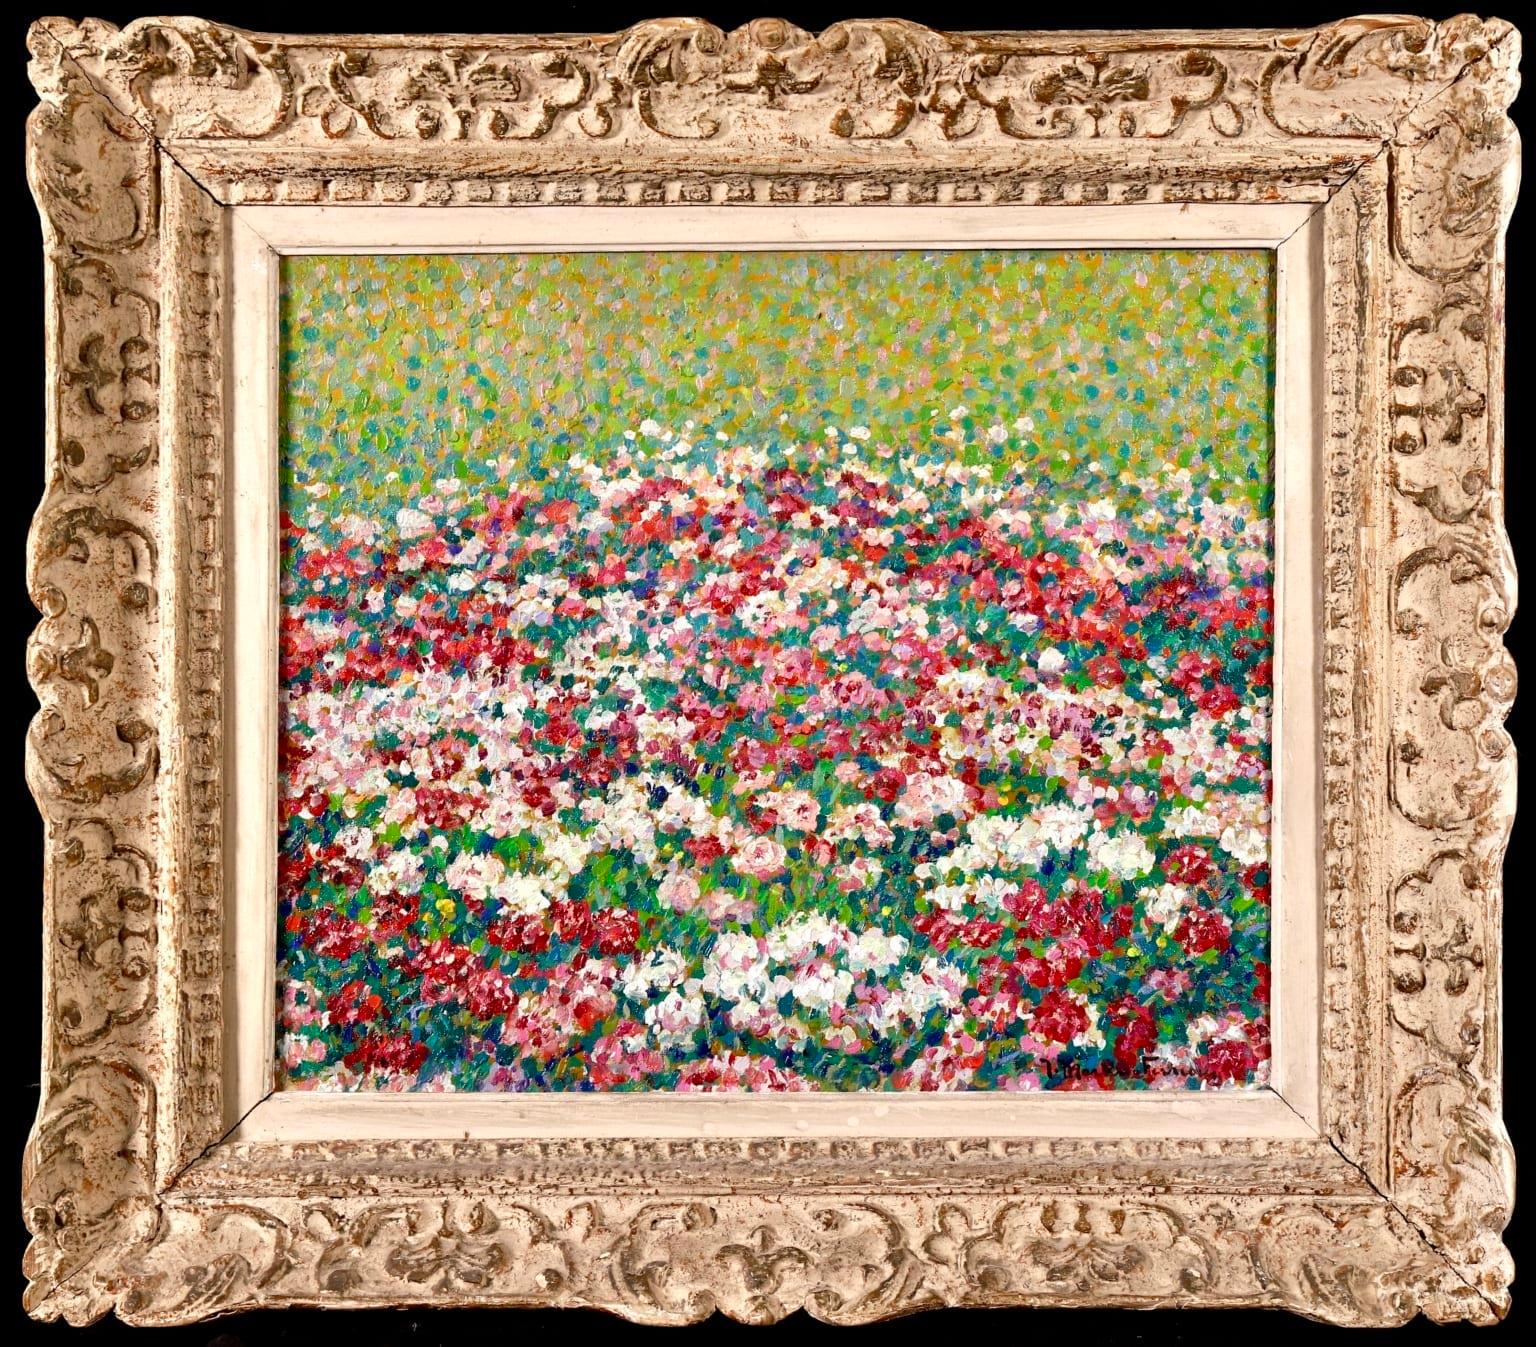 Field of Flowers - Post Impressionist Oil, Landscape Oil by J Martin-Ferrieres - Painting by Jacques Martin-Ferrières